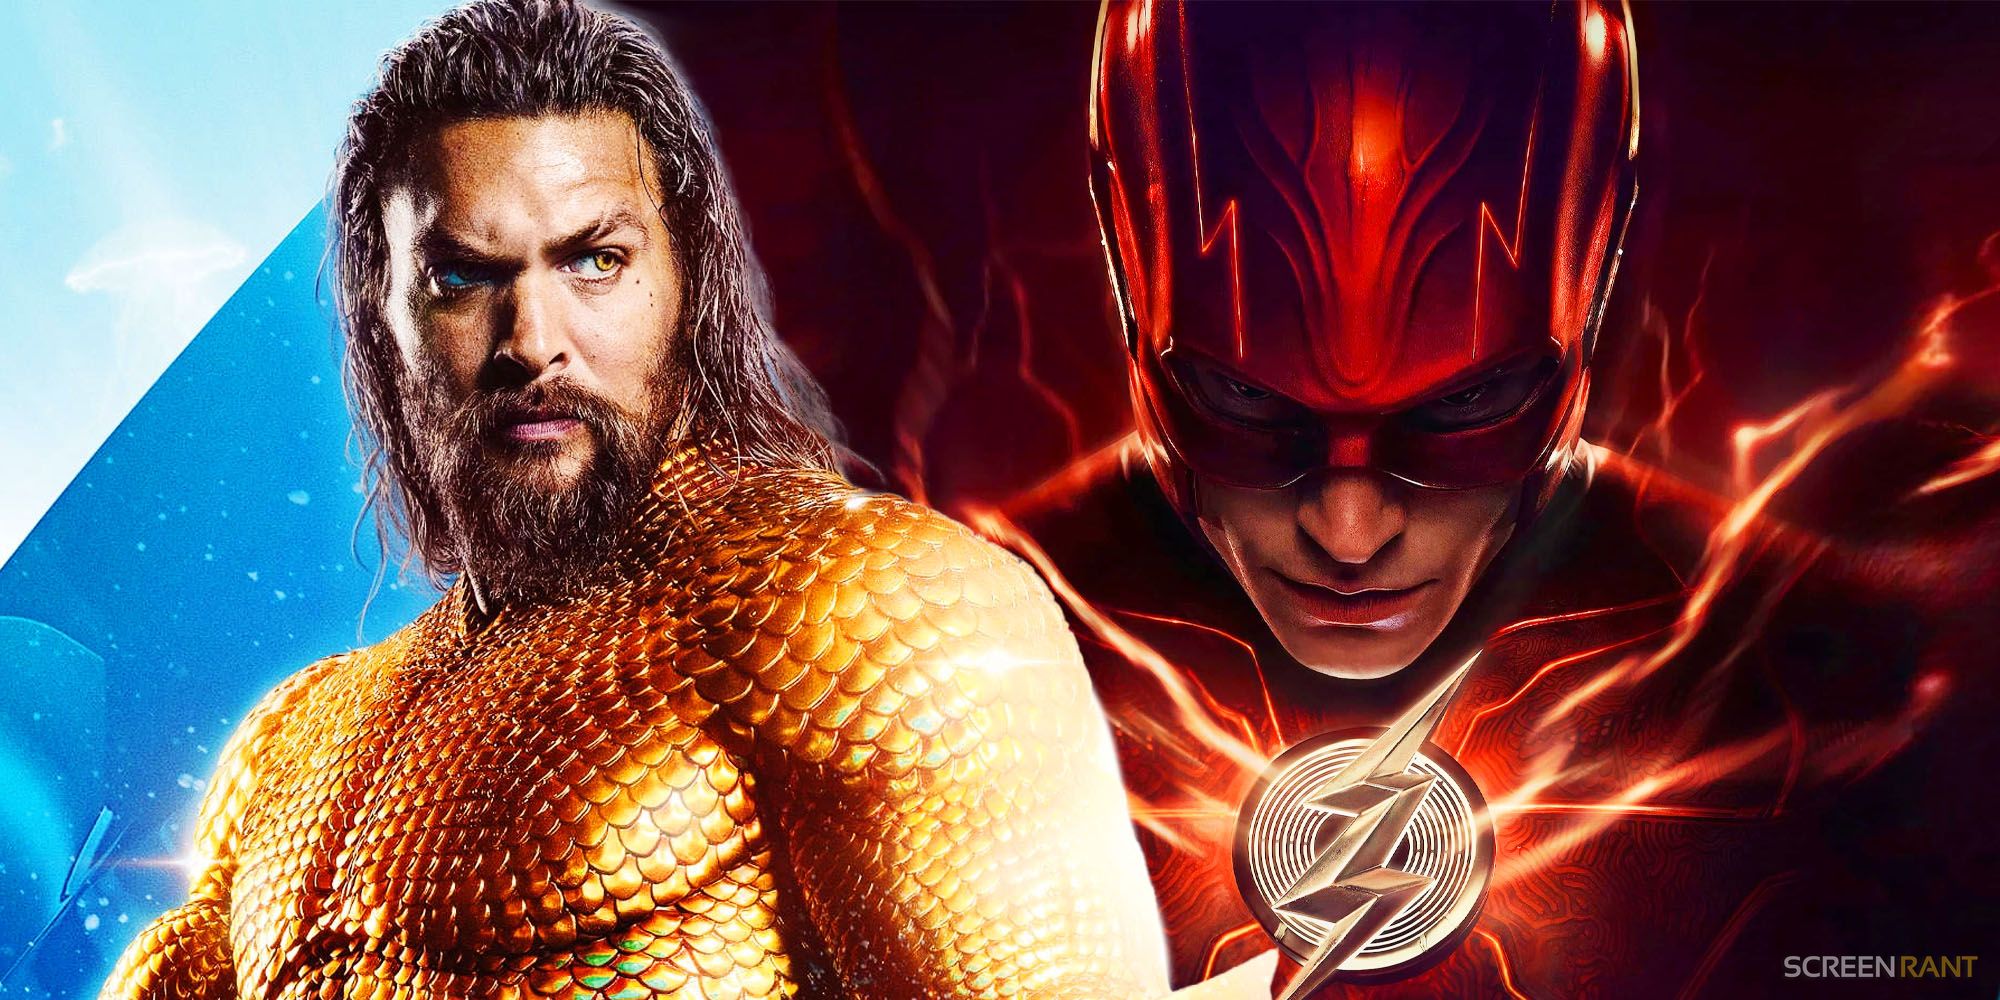 Custom image of Jason Momoa's Aquaman in his classic suit and Ezra Miller's The Flash looking down in a poster from his solo film.